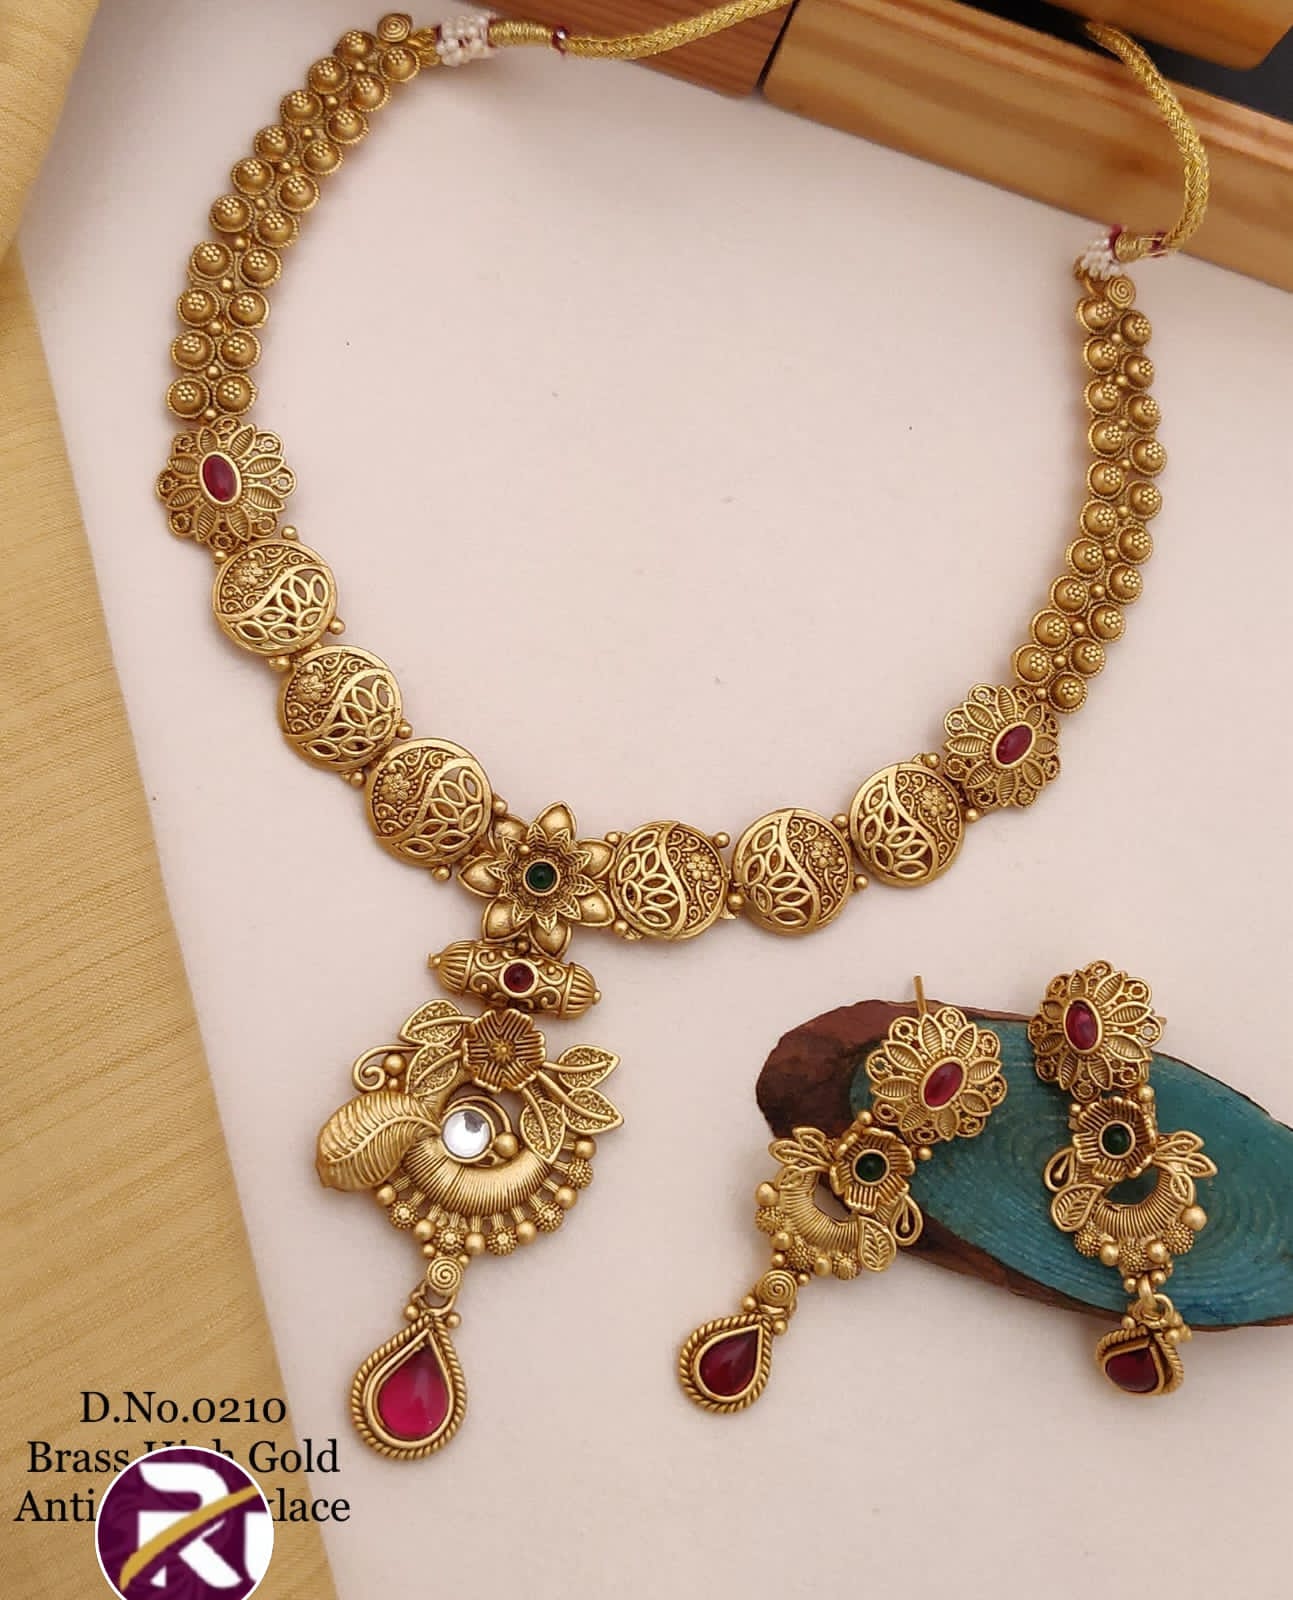 Beautiful High Gold Plated Antique Rajwadi Necklace set with Earrings